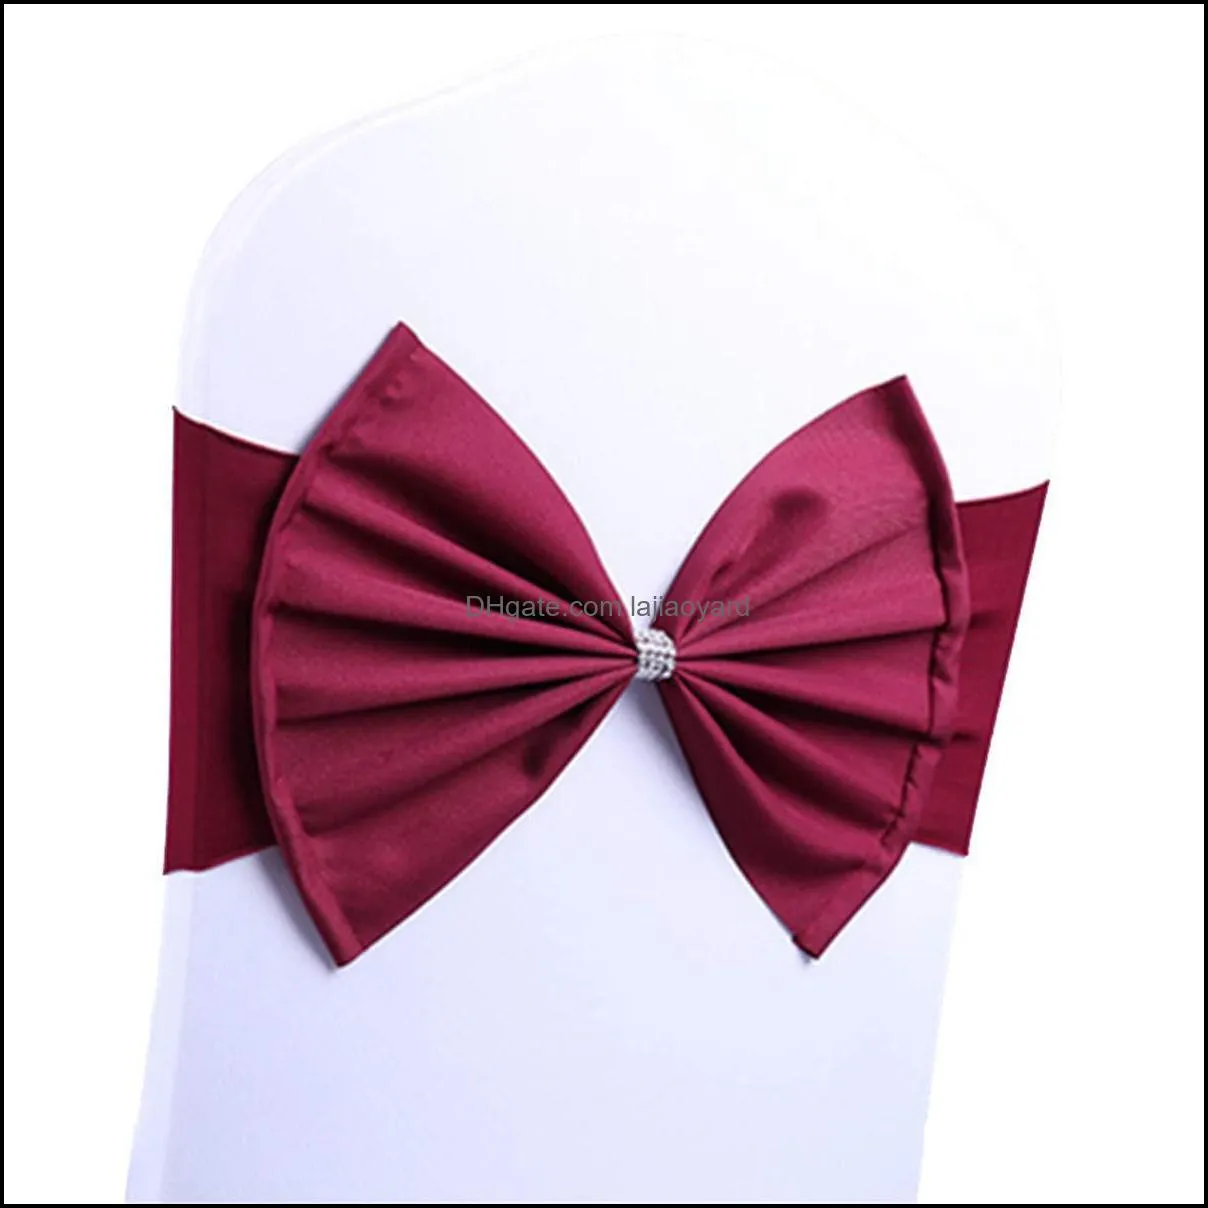 Bowknot Elastic Sashes Shine Diamond Ring Buckle Bandage Hotel Wedding Chairs Back Decoration Chair Covers 11 Colors